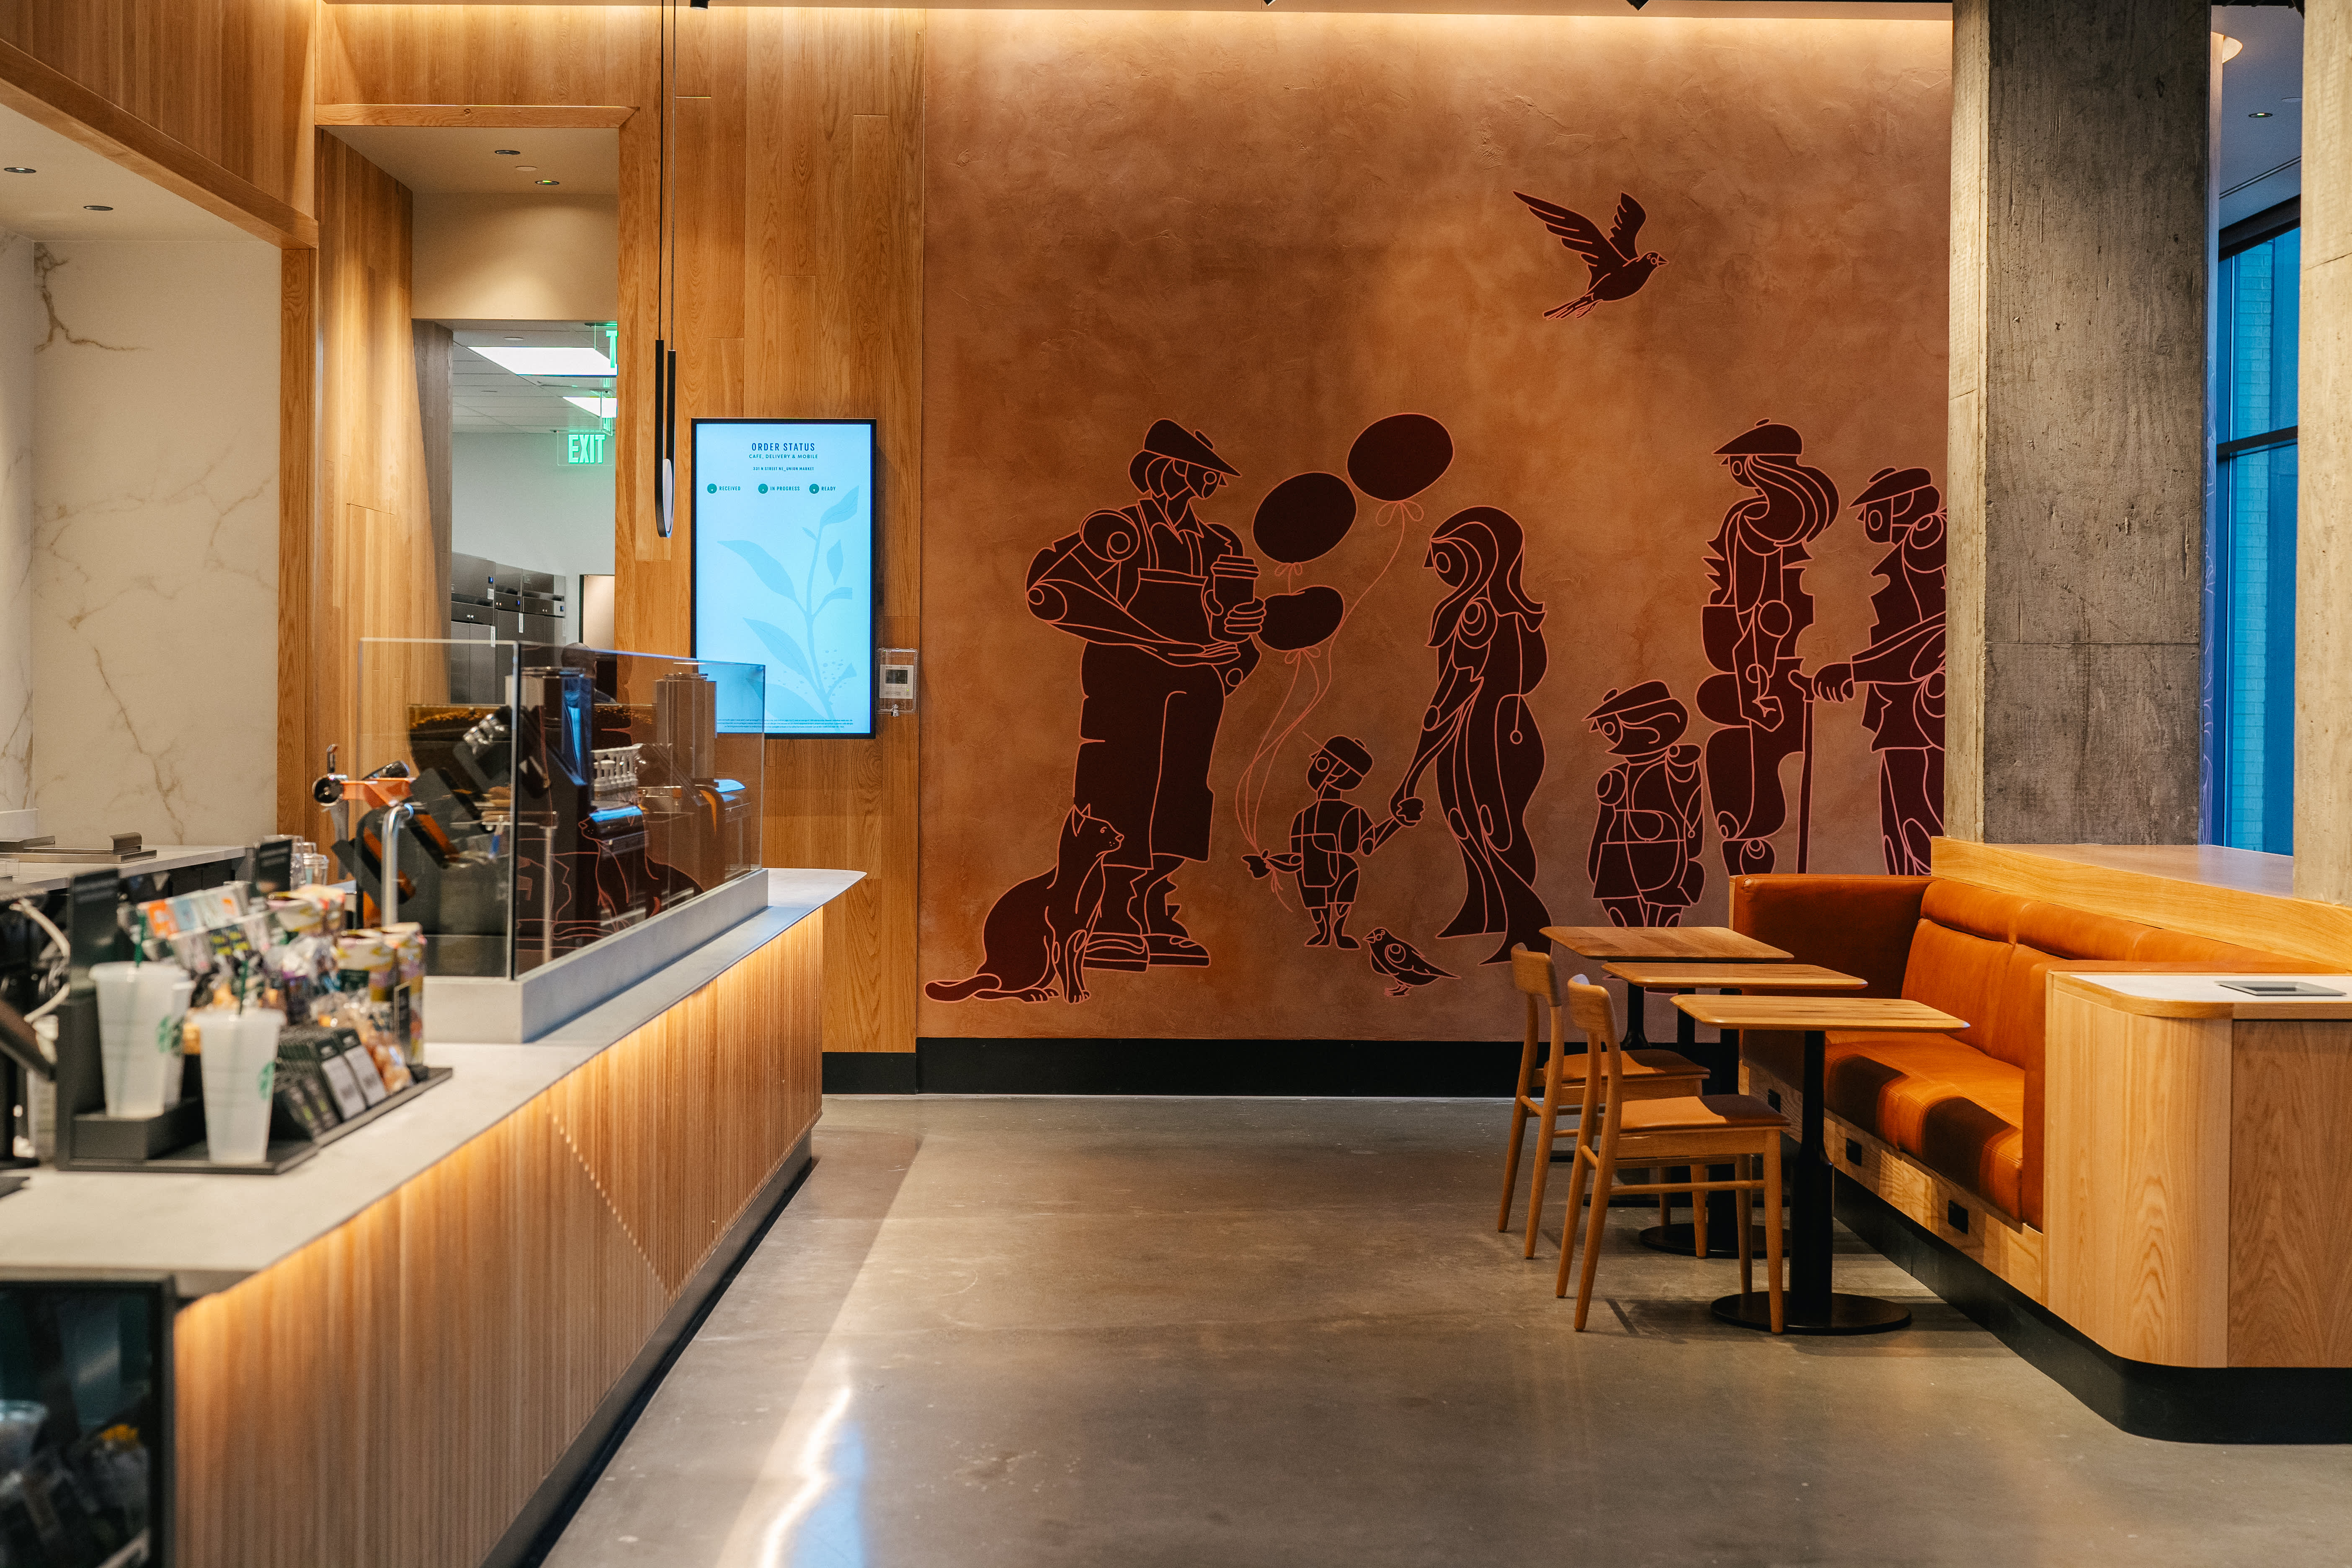 Starbucks has a new accessible store design.  Take a look inside